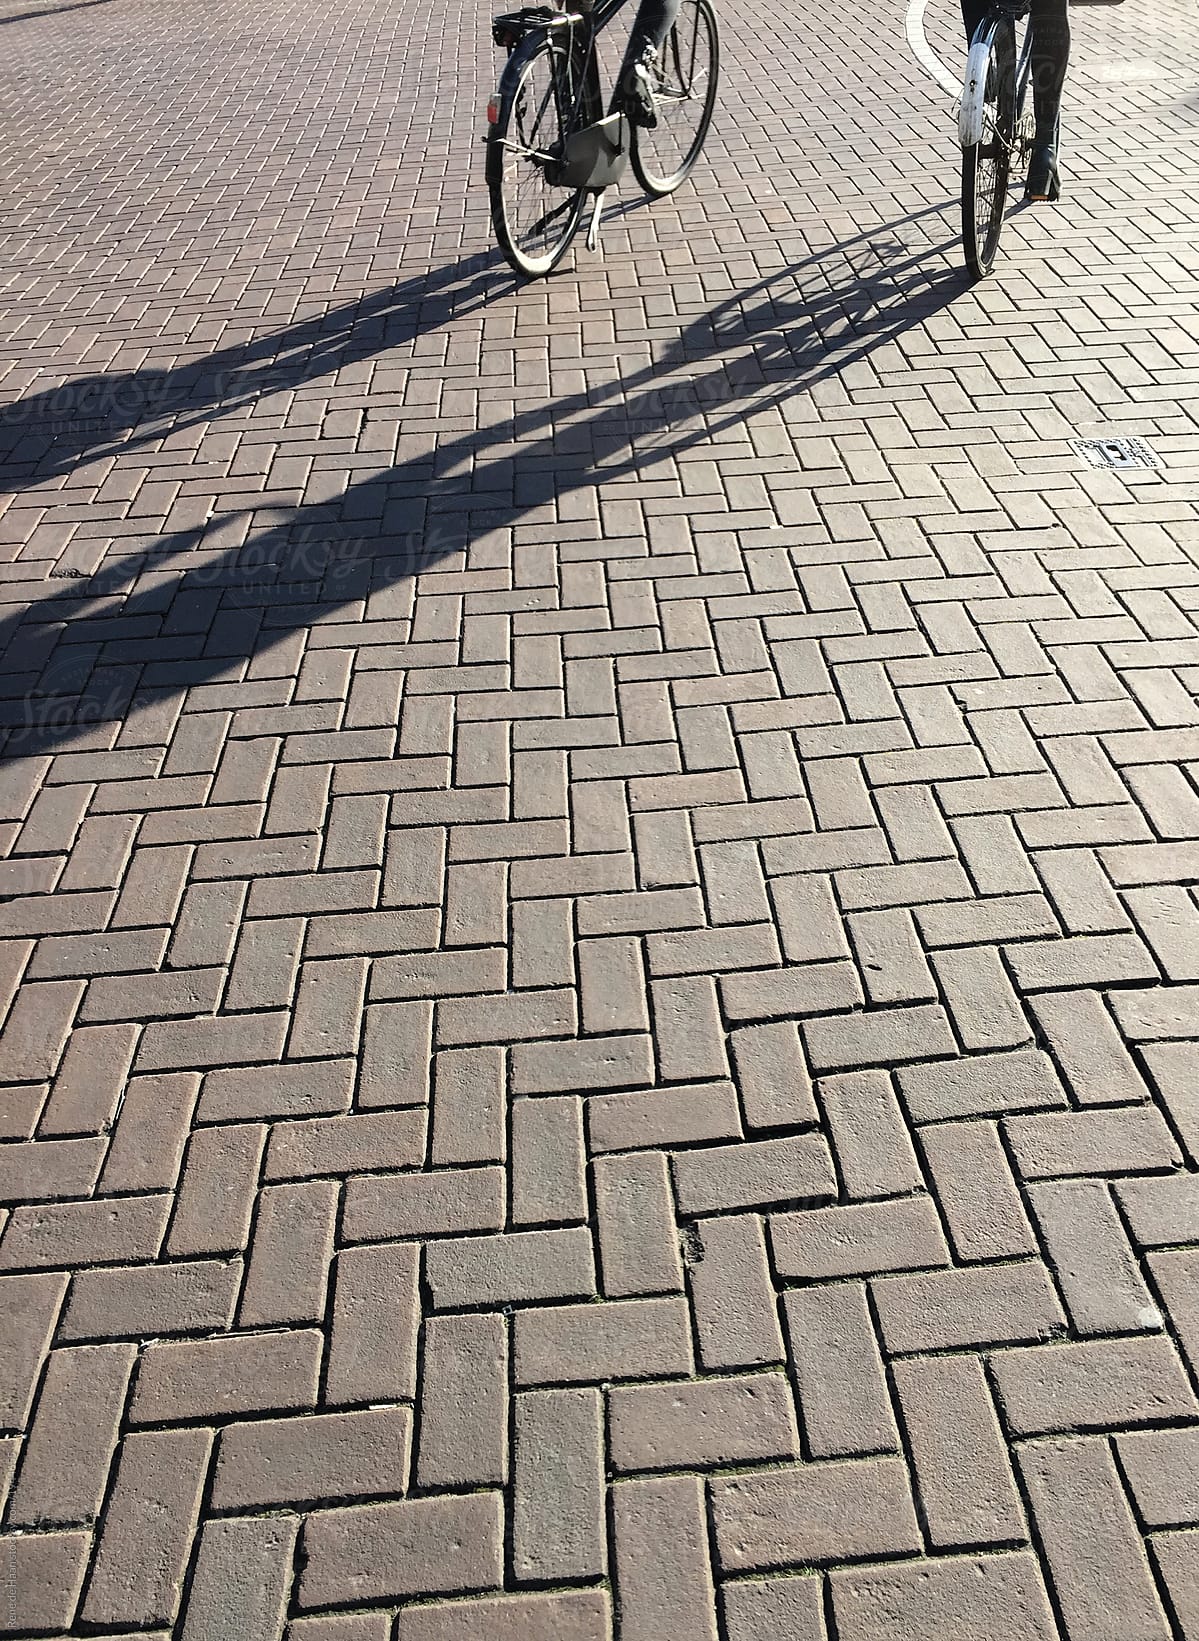 2 bicycles on street